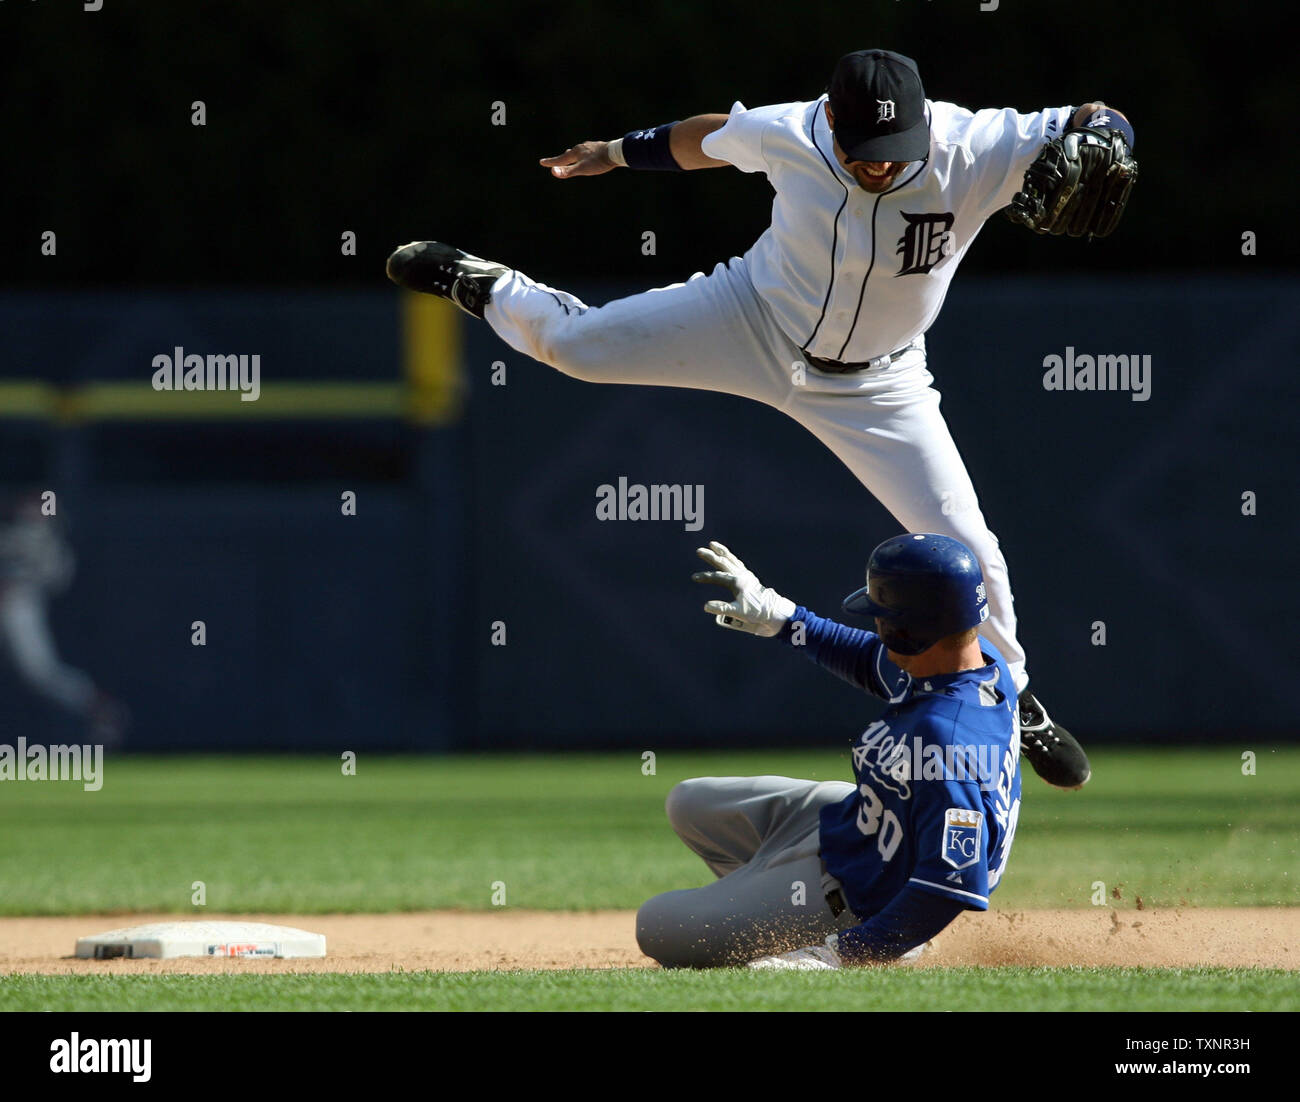 Detroit Tigers third baseman Miguel Cabrera catches a grounder hit by  Chicago White Sox' Brian Anderson for an out in the eighth inning of a  baseball game Sunday, April 6, 2008, in